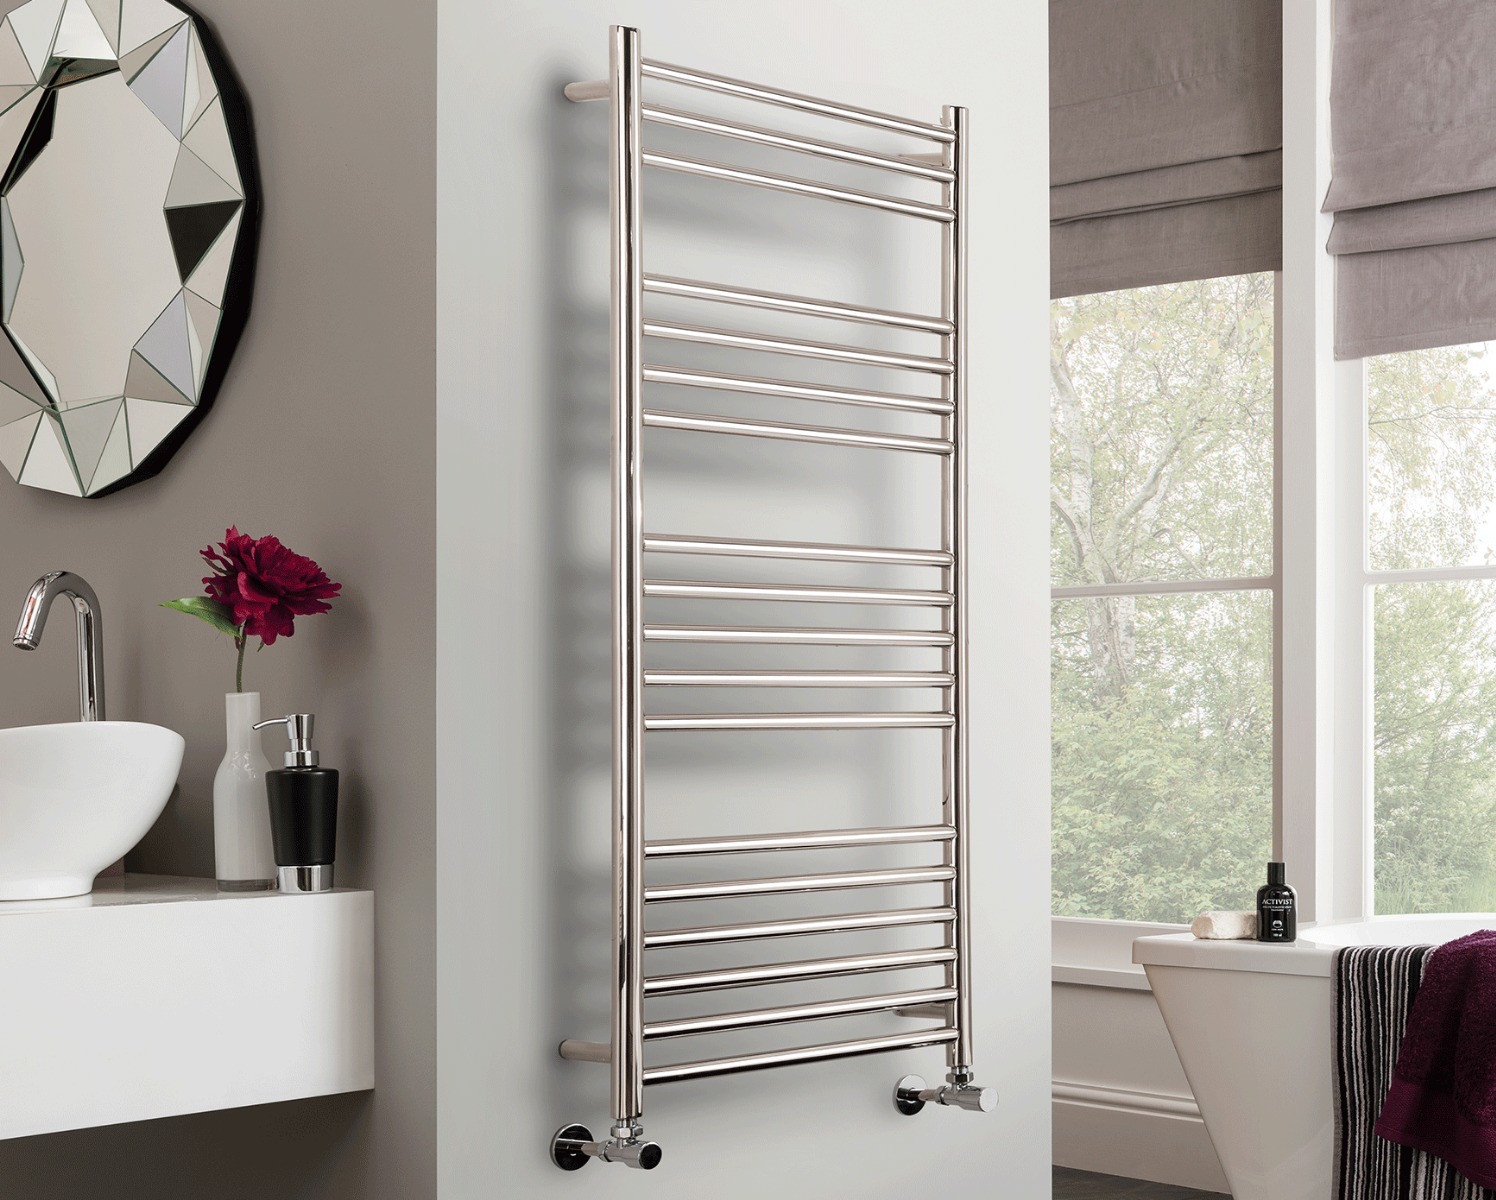 Ladder Rails Chube Heating Only - Polished Stainless Steel 800x500